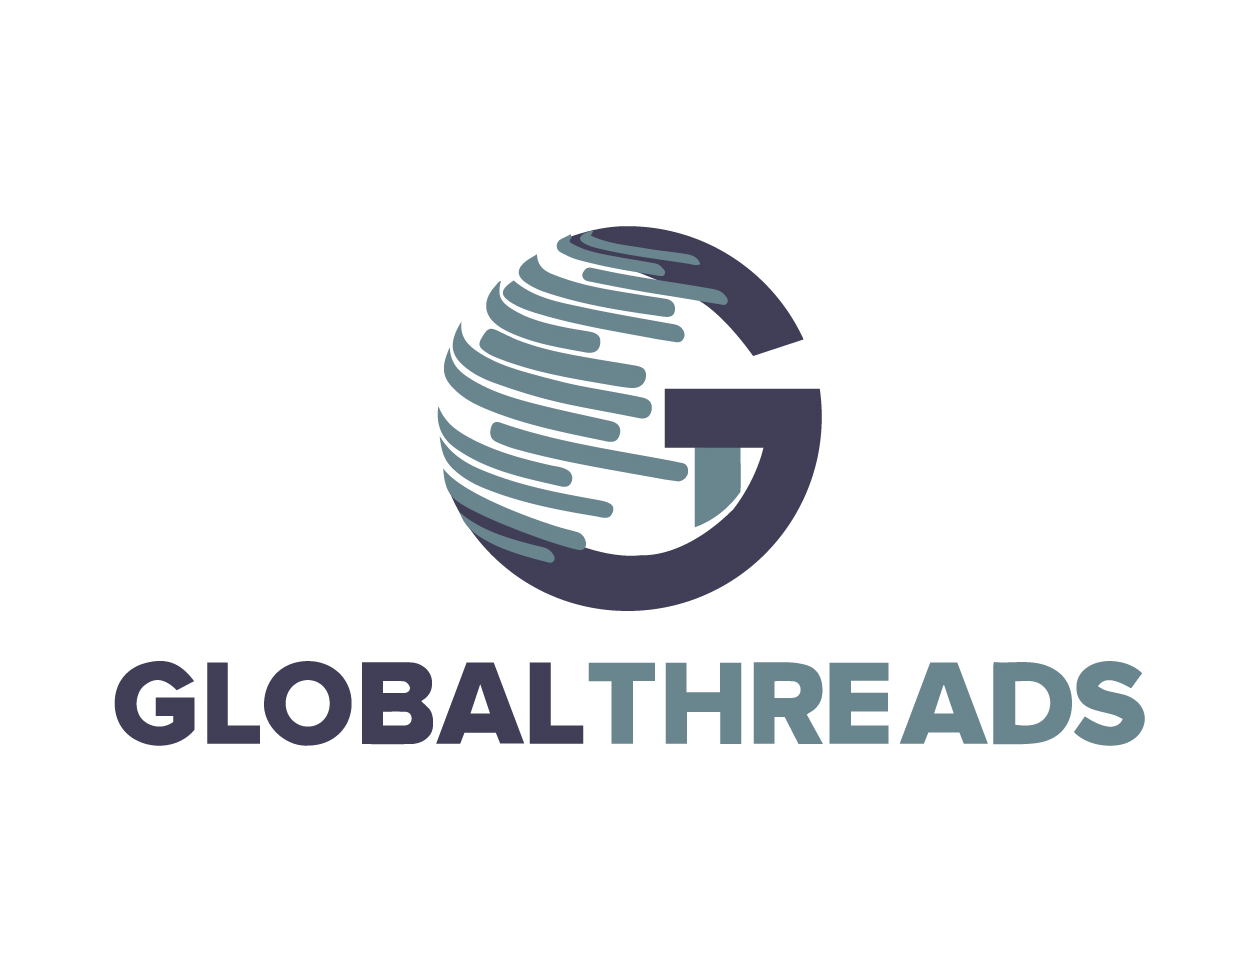 Let's Go Beyond the Threads - Global Threads